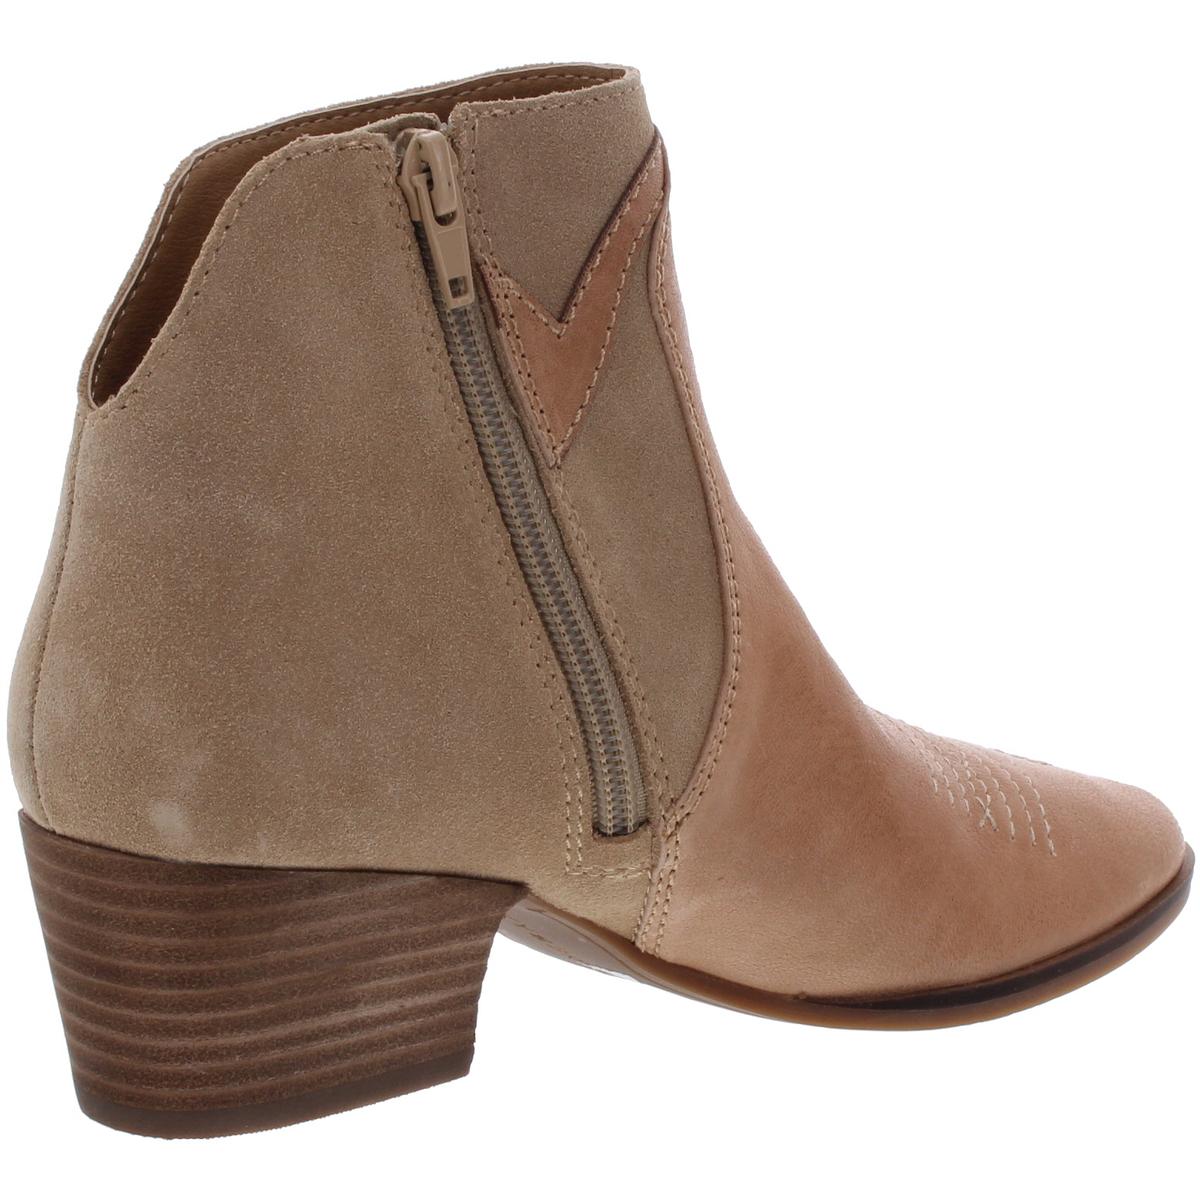 Lucky Brand Womens Idellina Beige Ankle Boots Shoes 6 Medium (B,M) BHFO ...